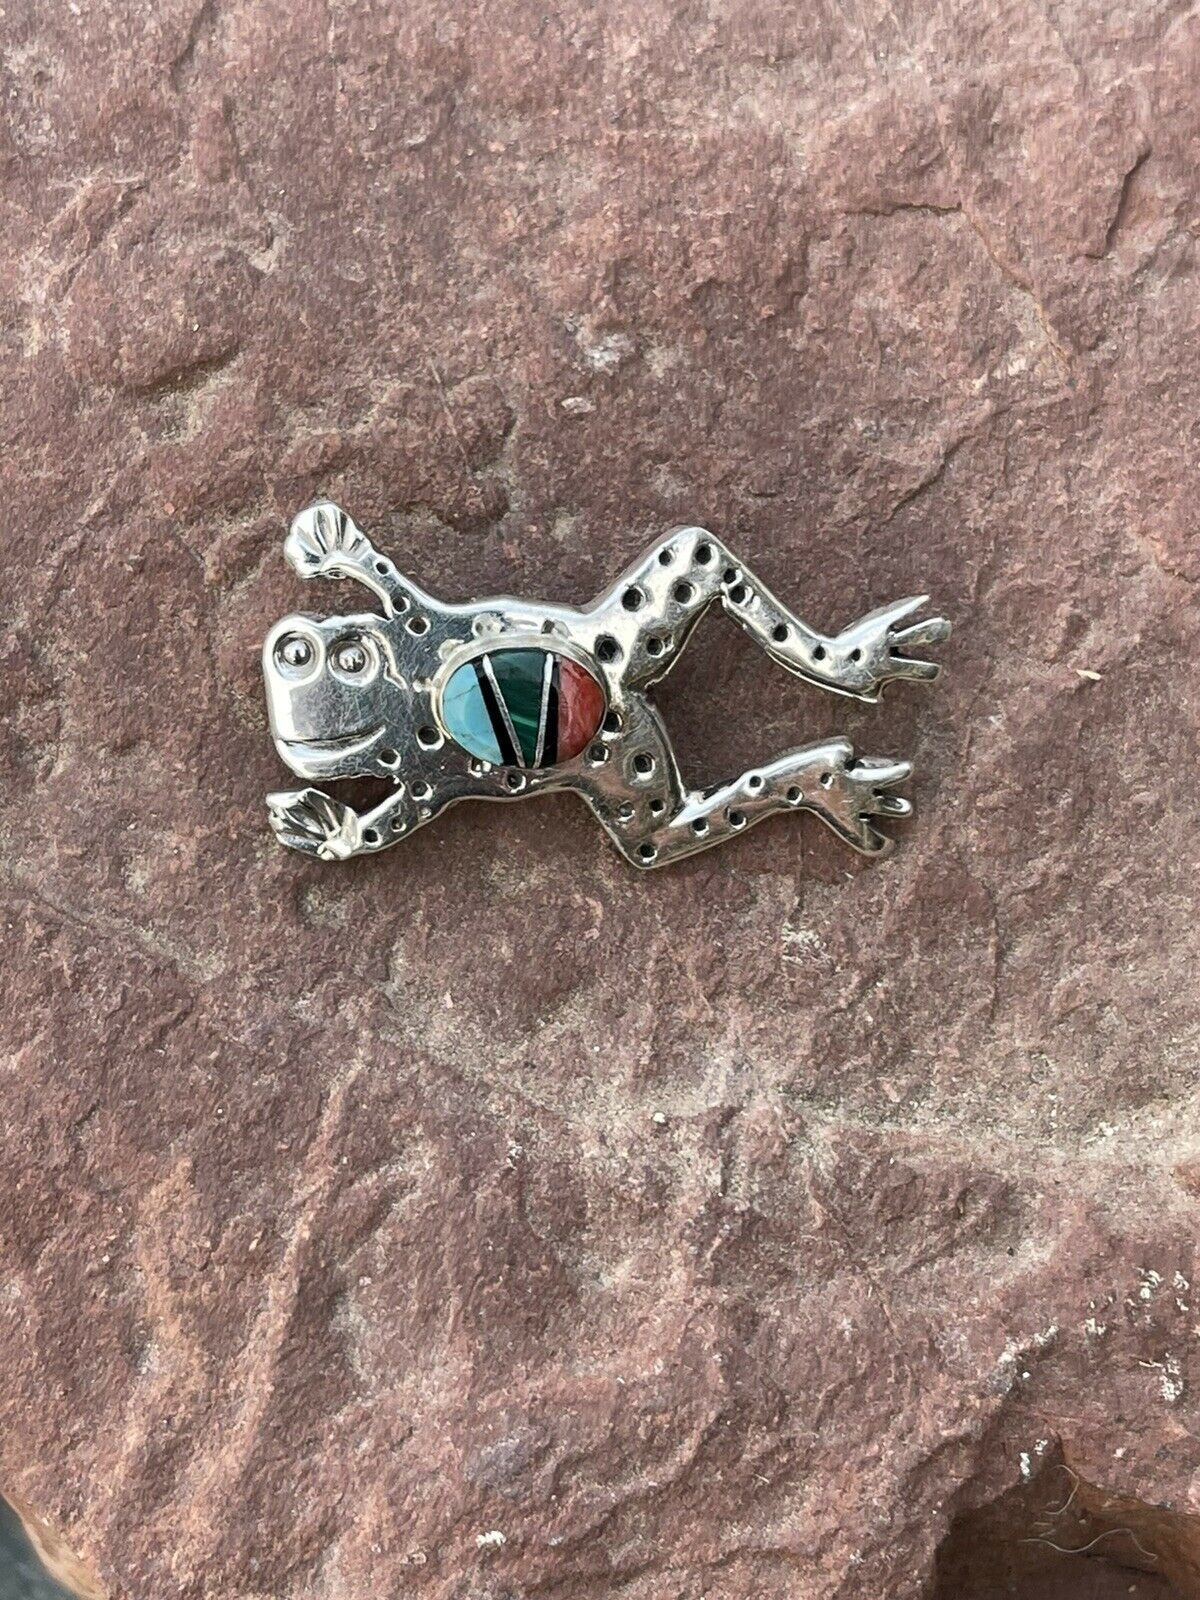 Navajo Sterling Silver Multi Stone Leap Frog Pendant Pin Signed